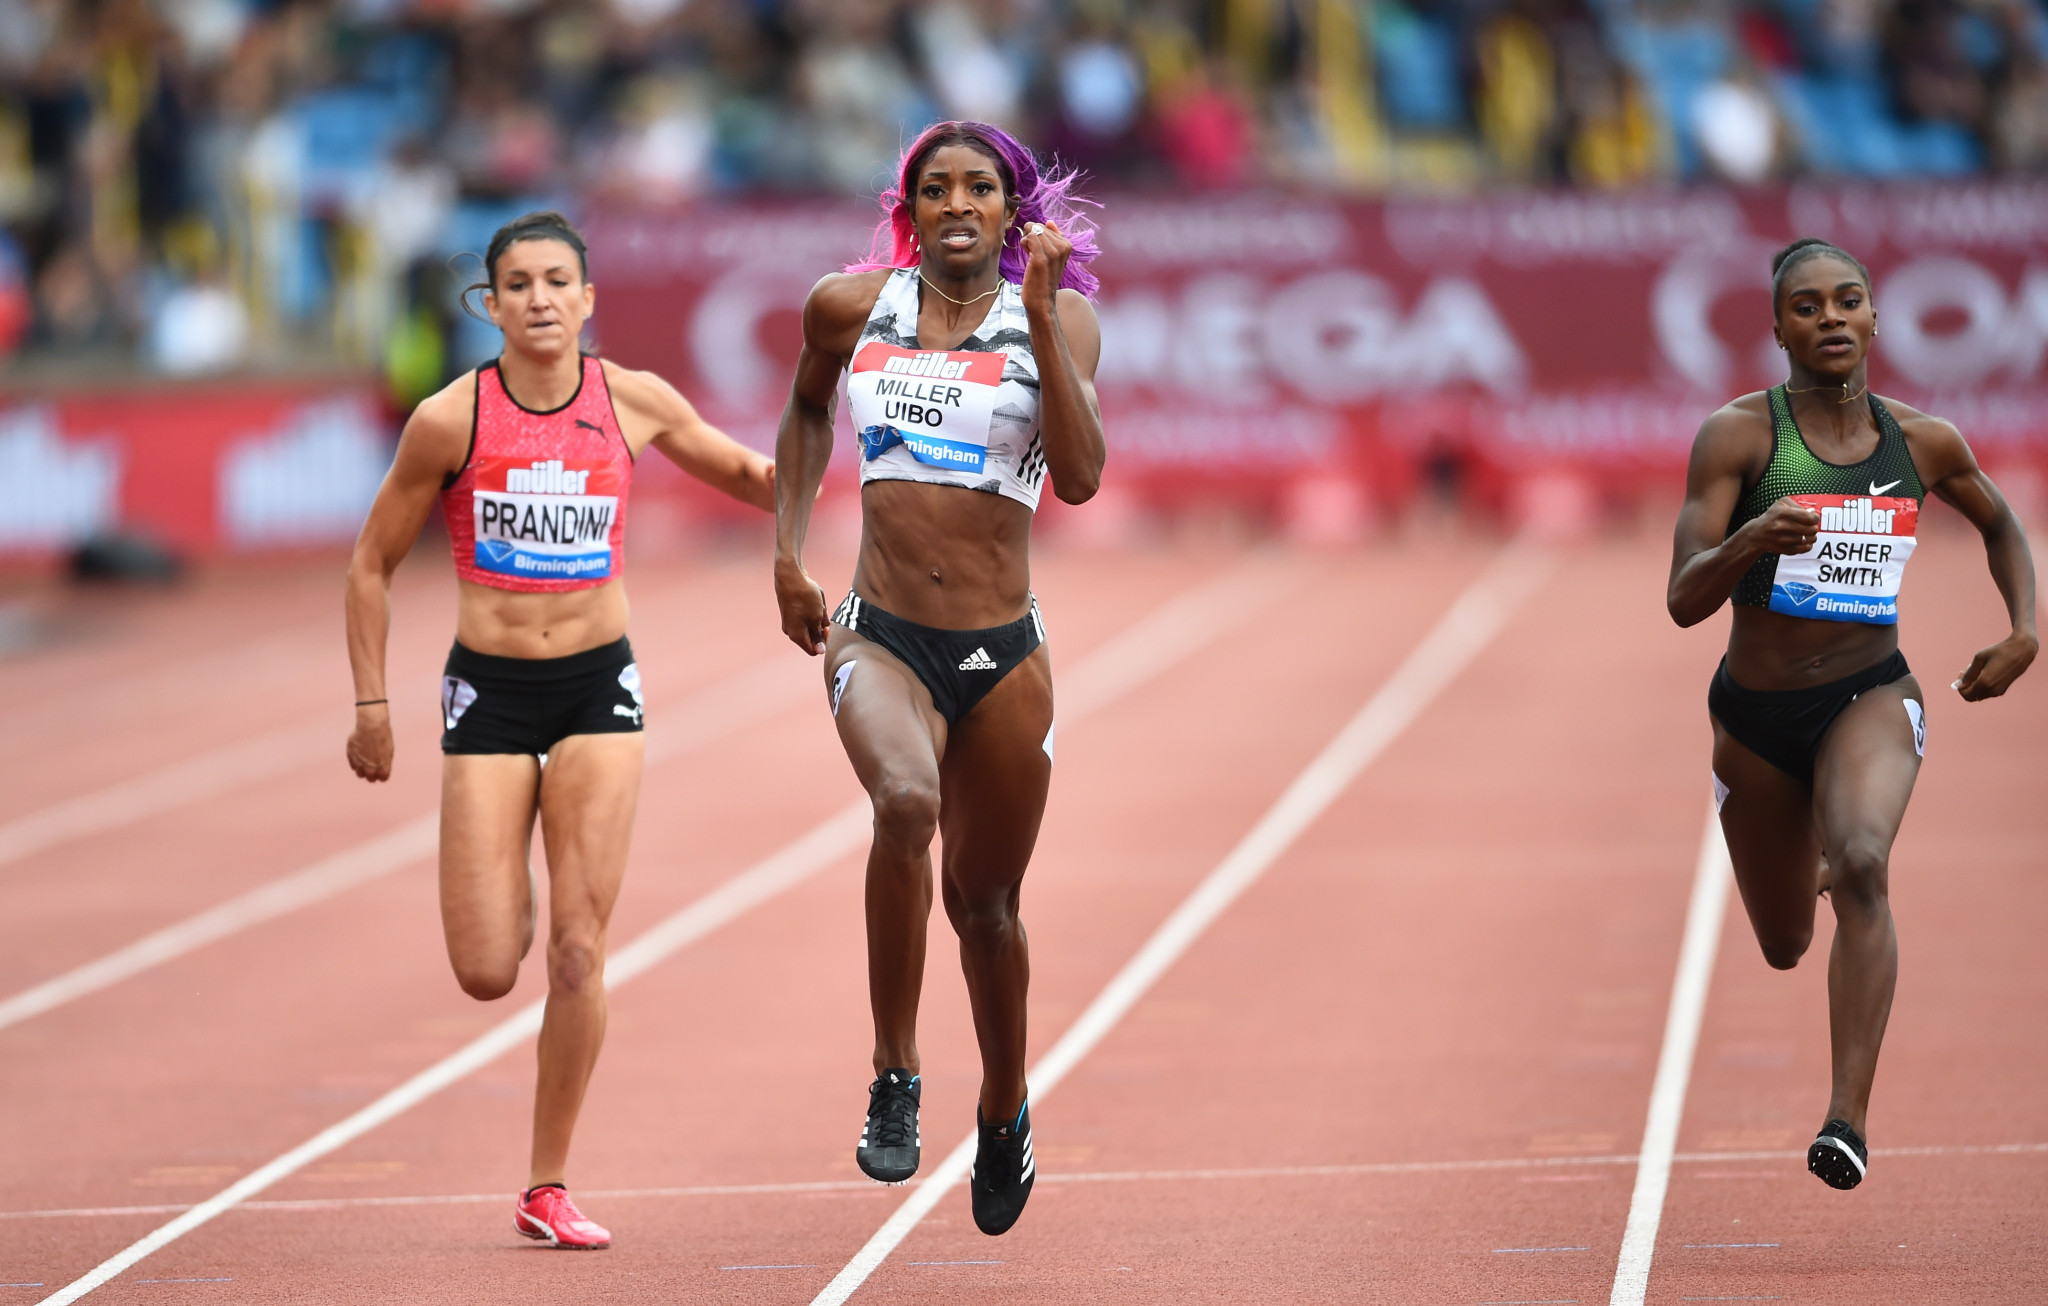 Olympic 400m champion Shaunae Miller-Uibo will defend her 200m title in Brussels ©Getty Images